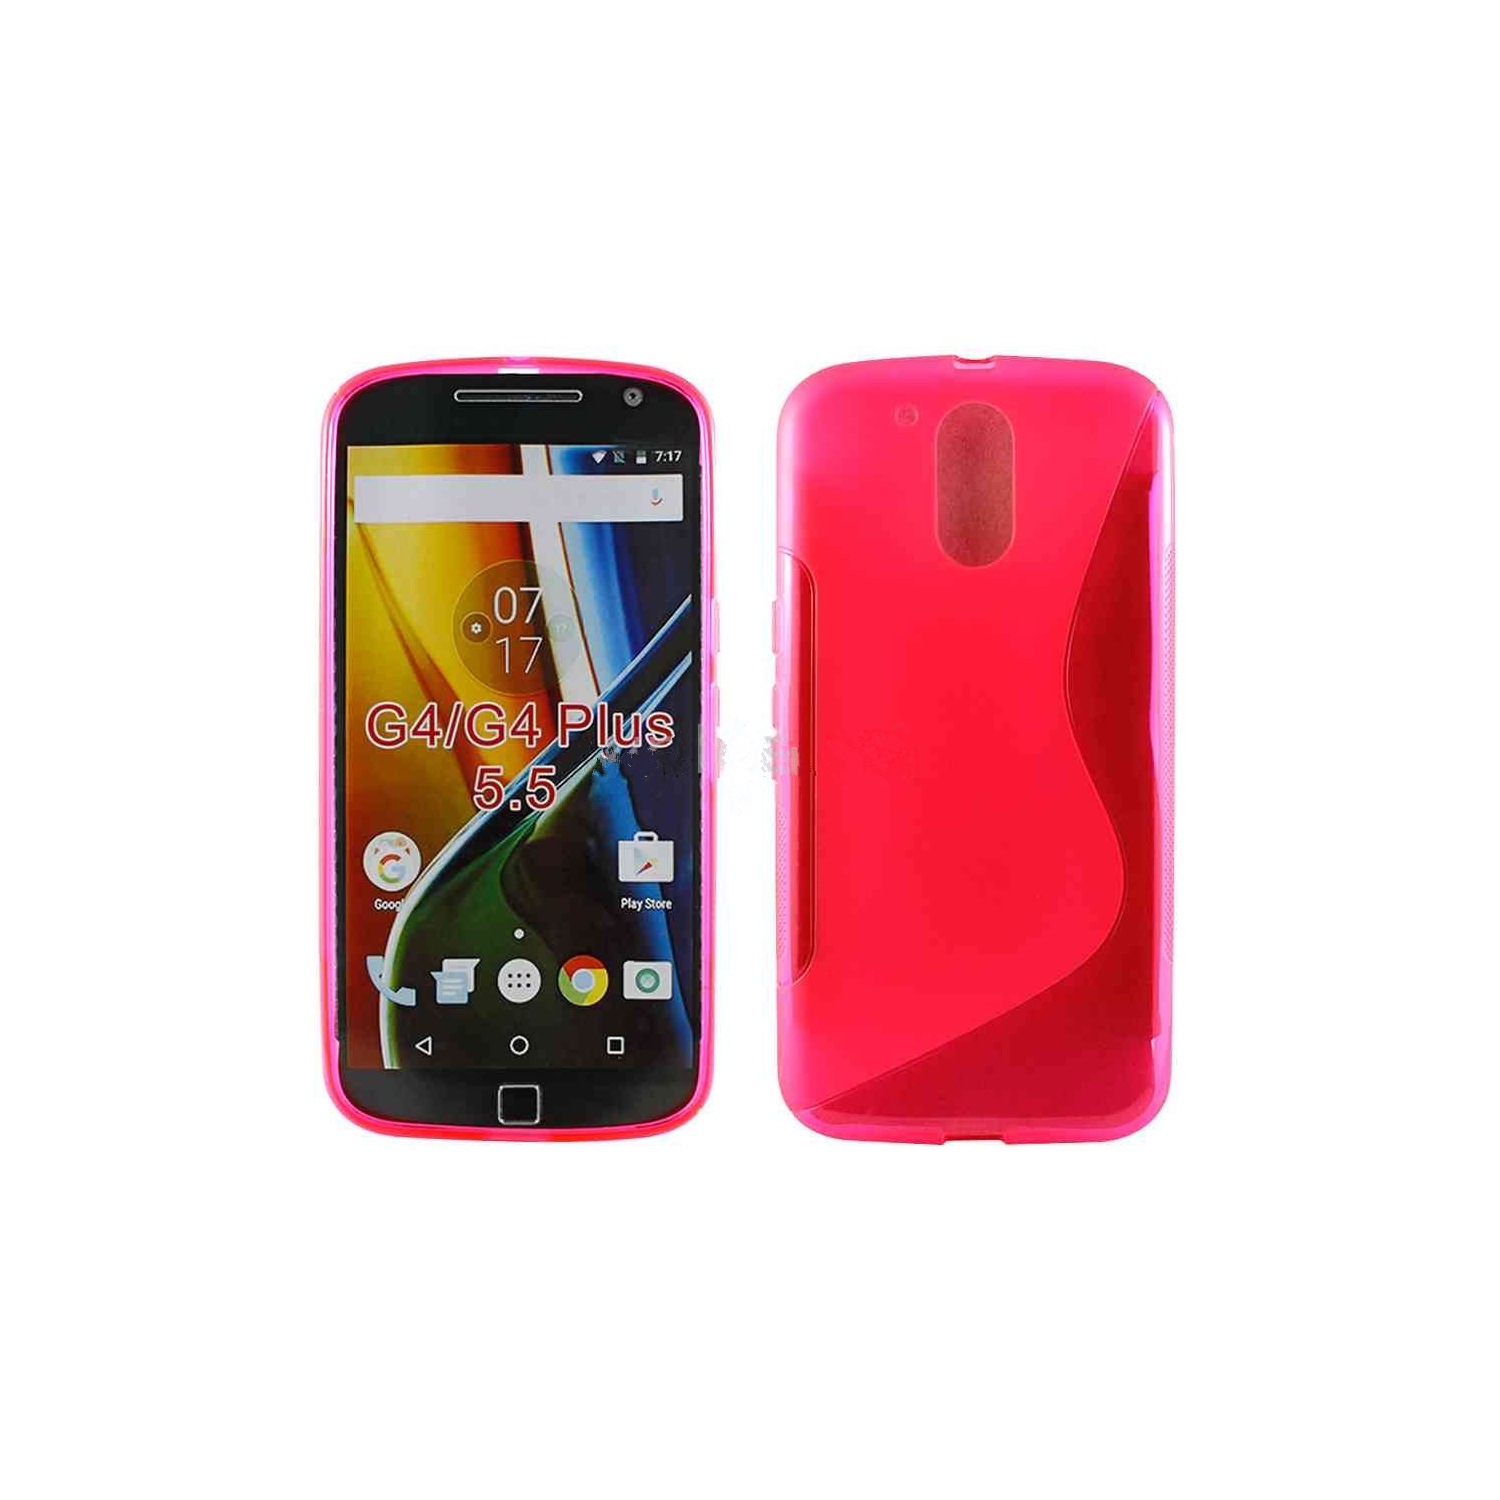 【CSmart】 Ultra Thin Soft TPU Silicone Jelly Bumper Back Cover Case for Motorola G4 / G4 Plus, Hot Pink